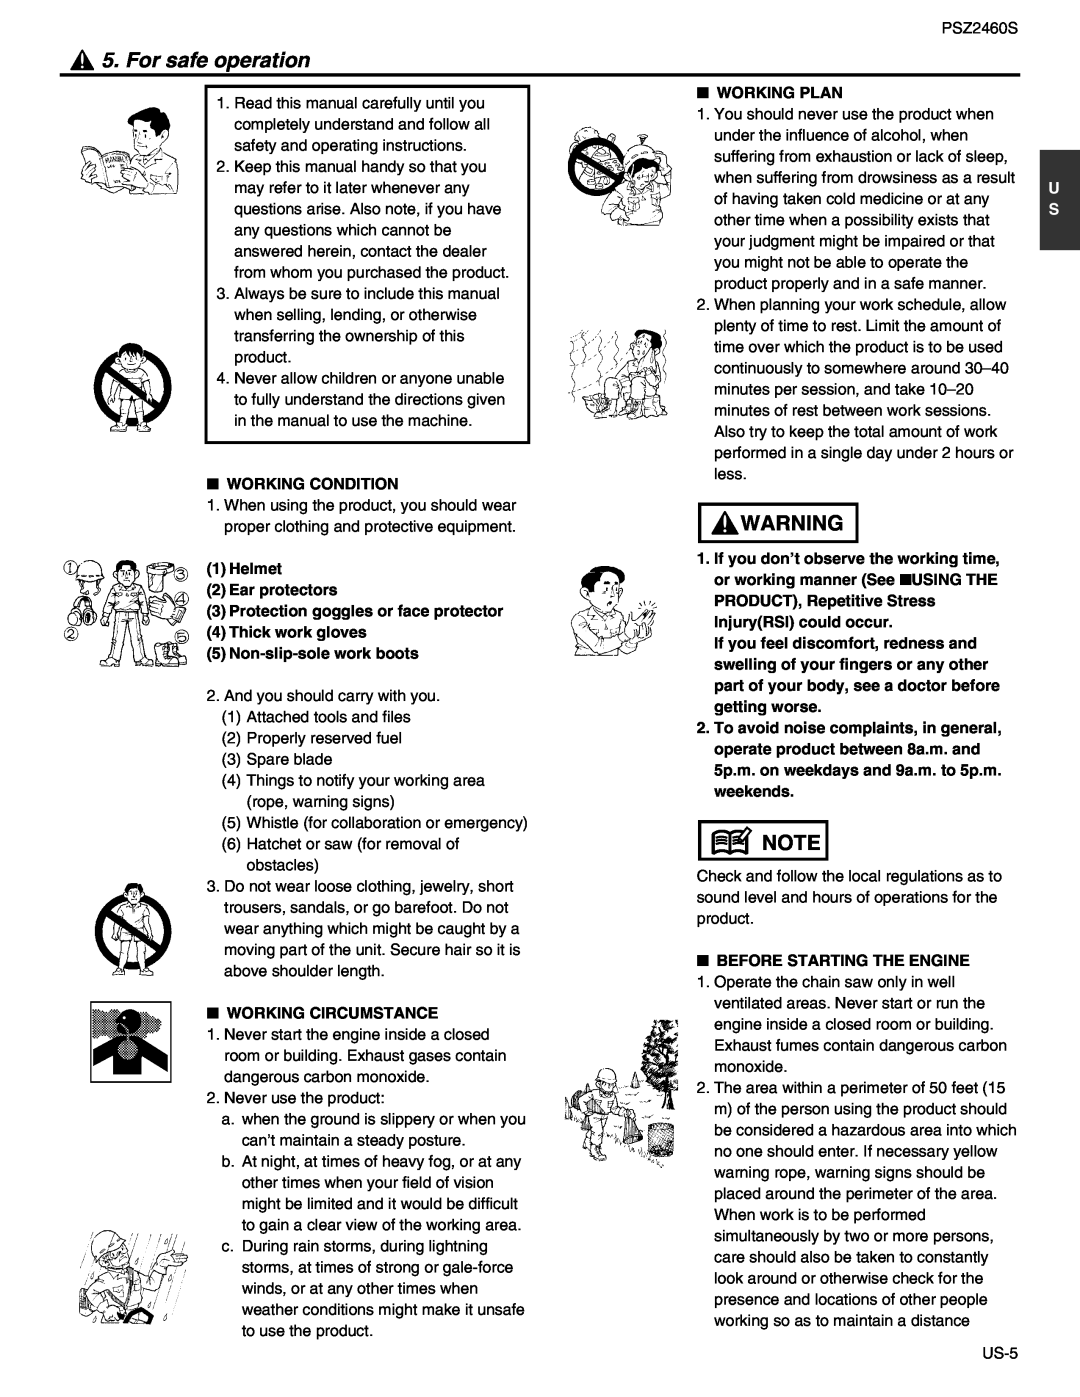 RedMax PSZ2460S manual For safe operation 